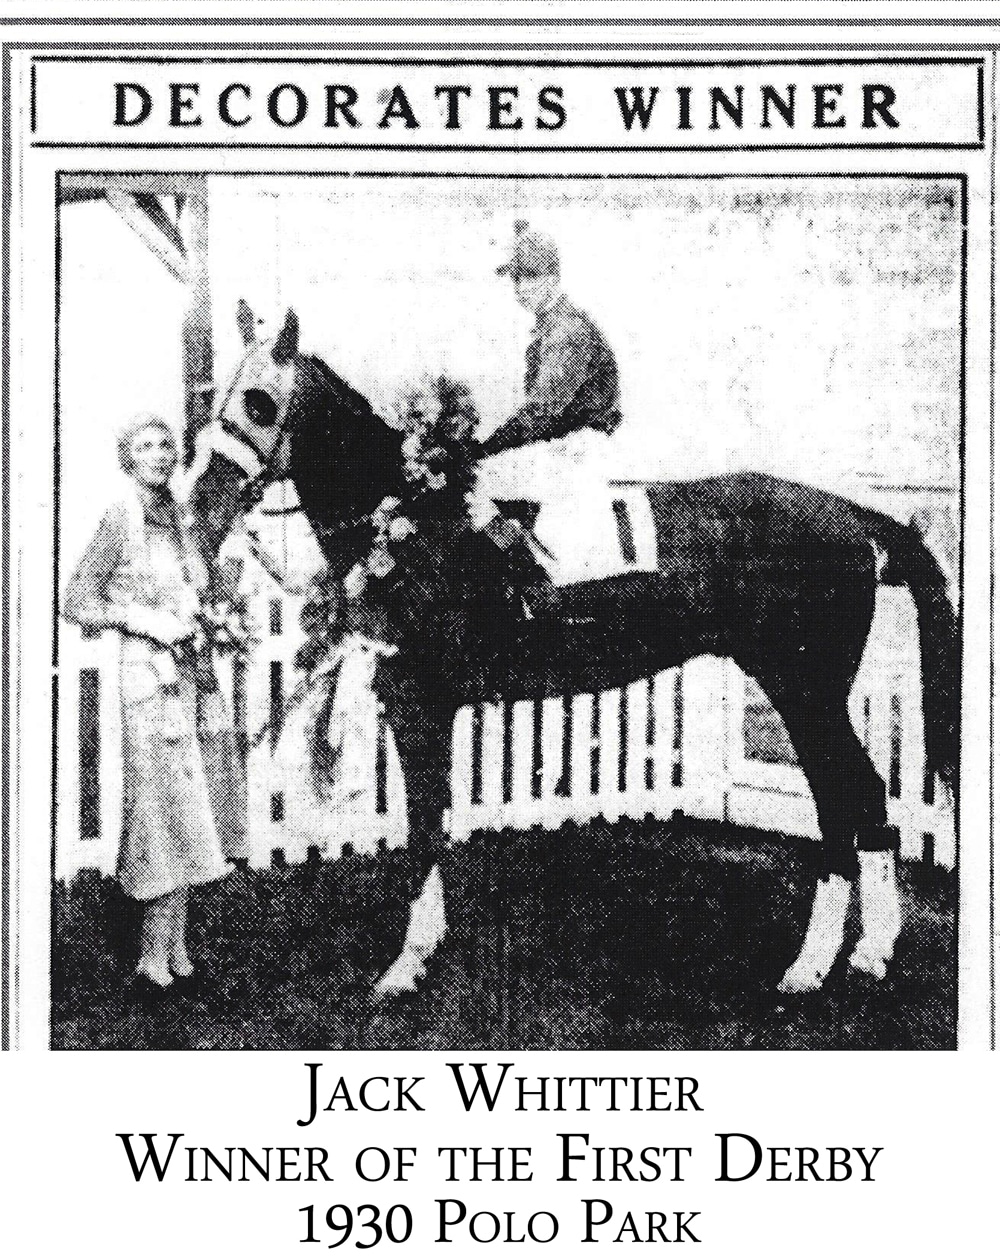 Jack Whittier. Winner of the first Derby in 1930. Polo Park.